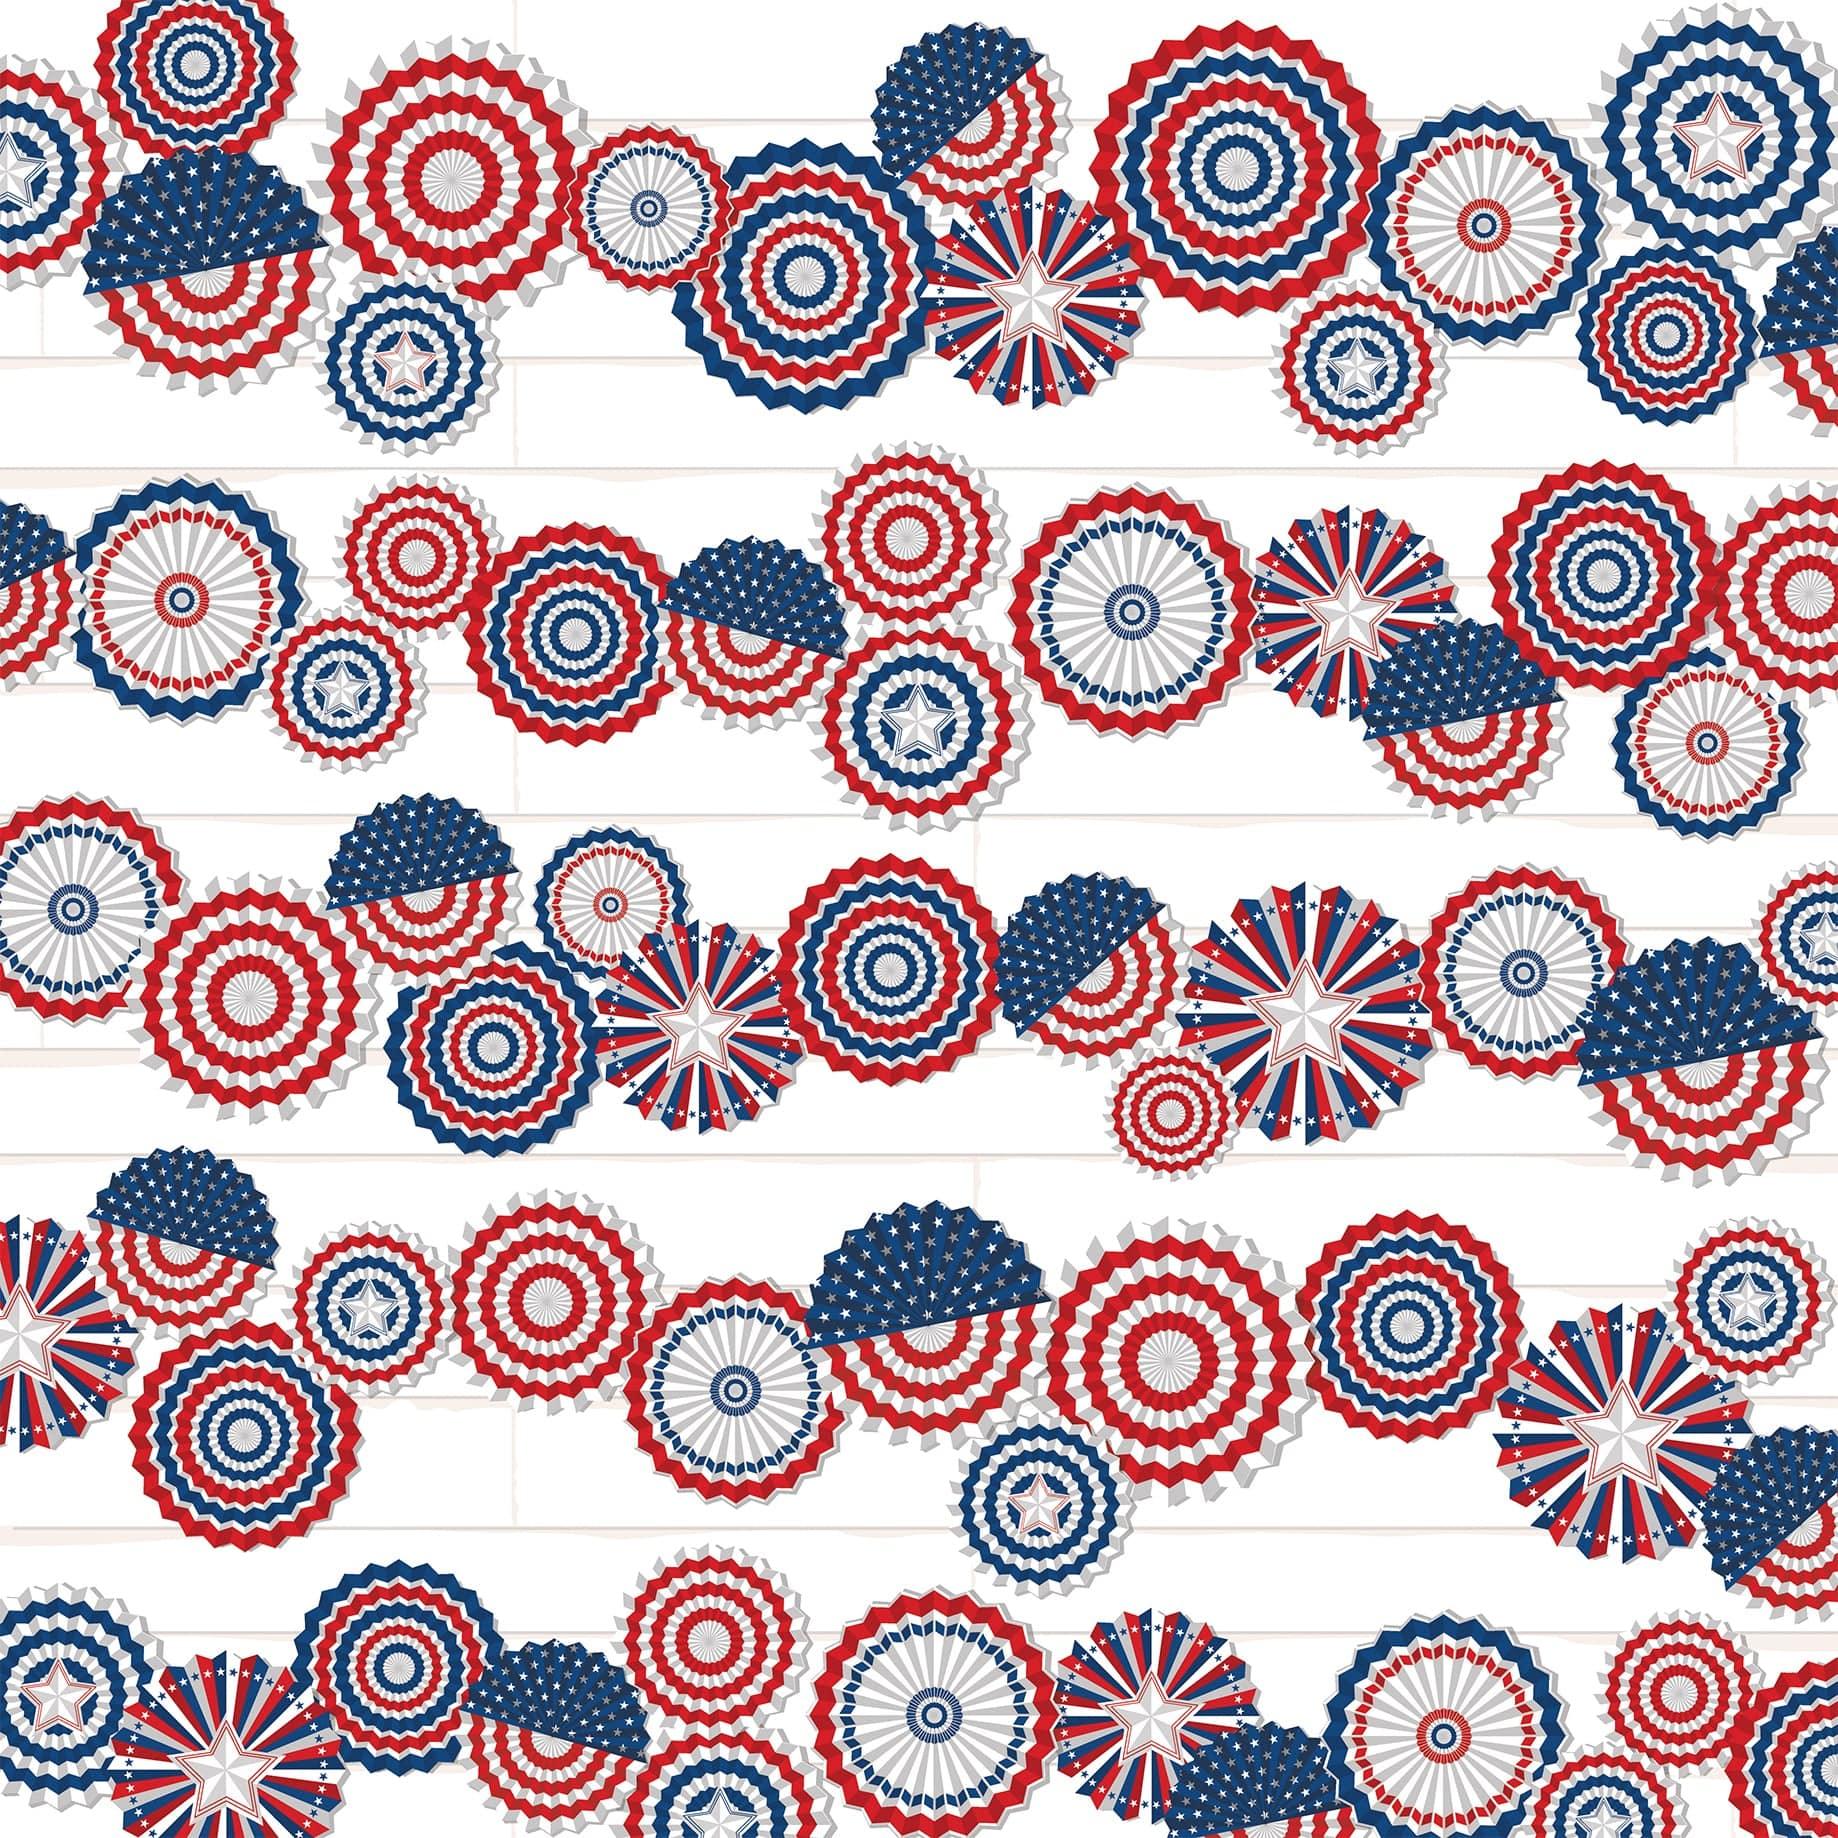 God Bless America Collection Fanfare 12 x 12 Double-Sided Scrapbook Paper by Carta Bella - Scrapbook Supply Companies